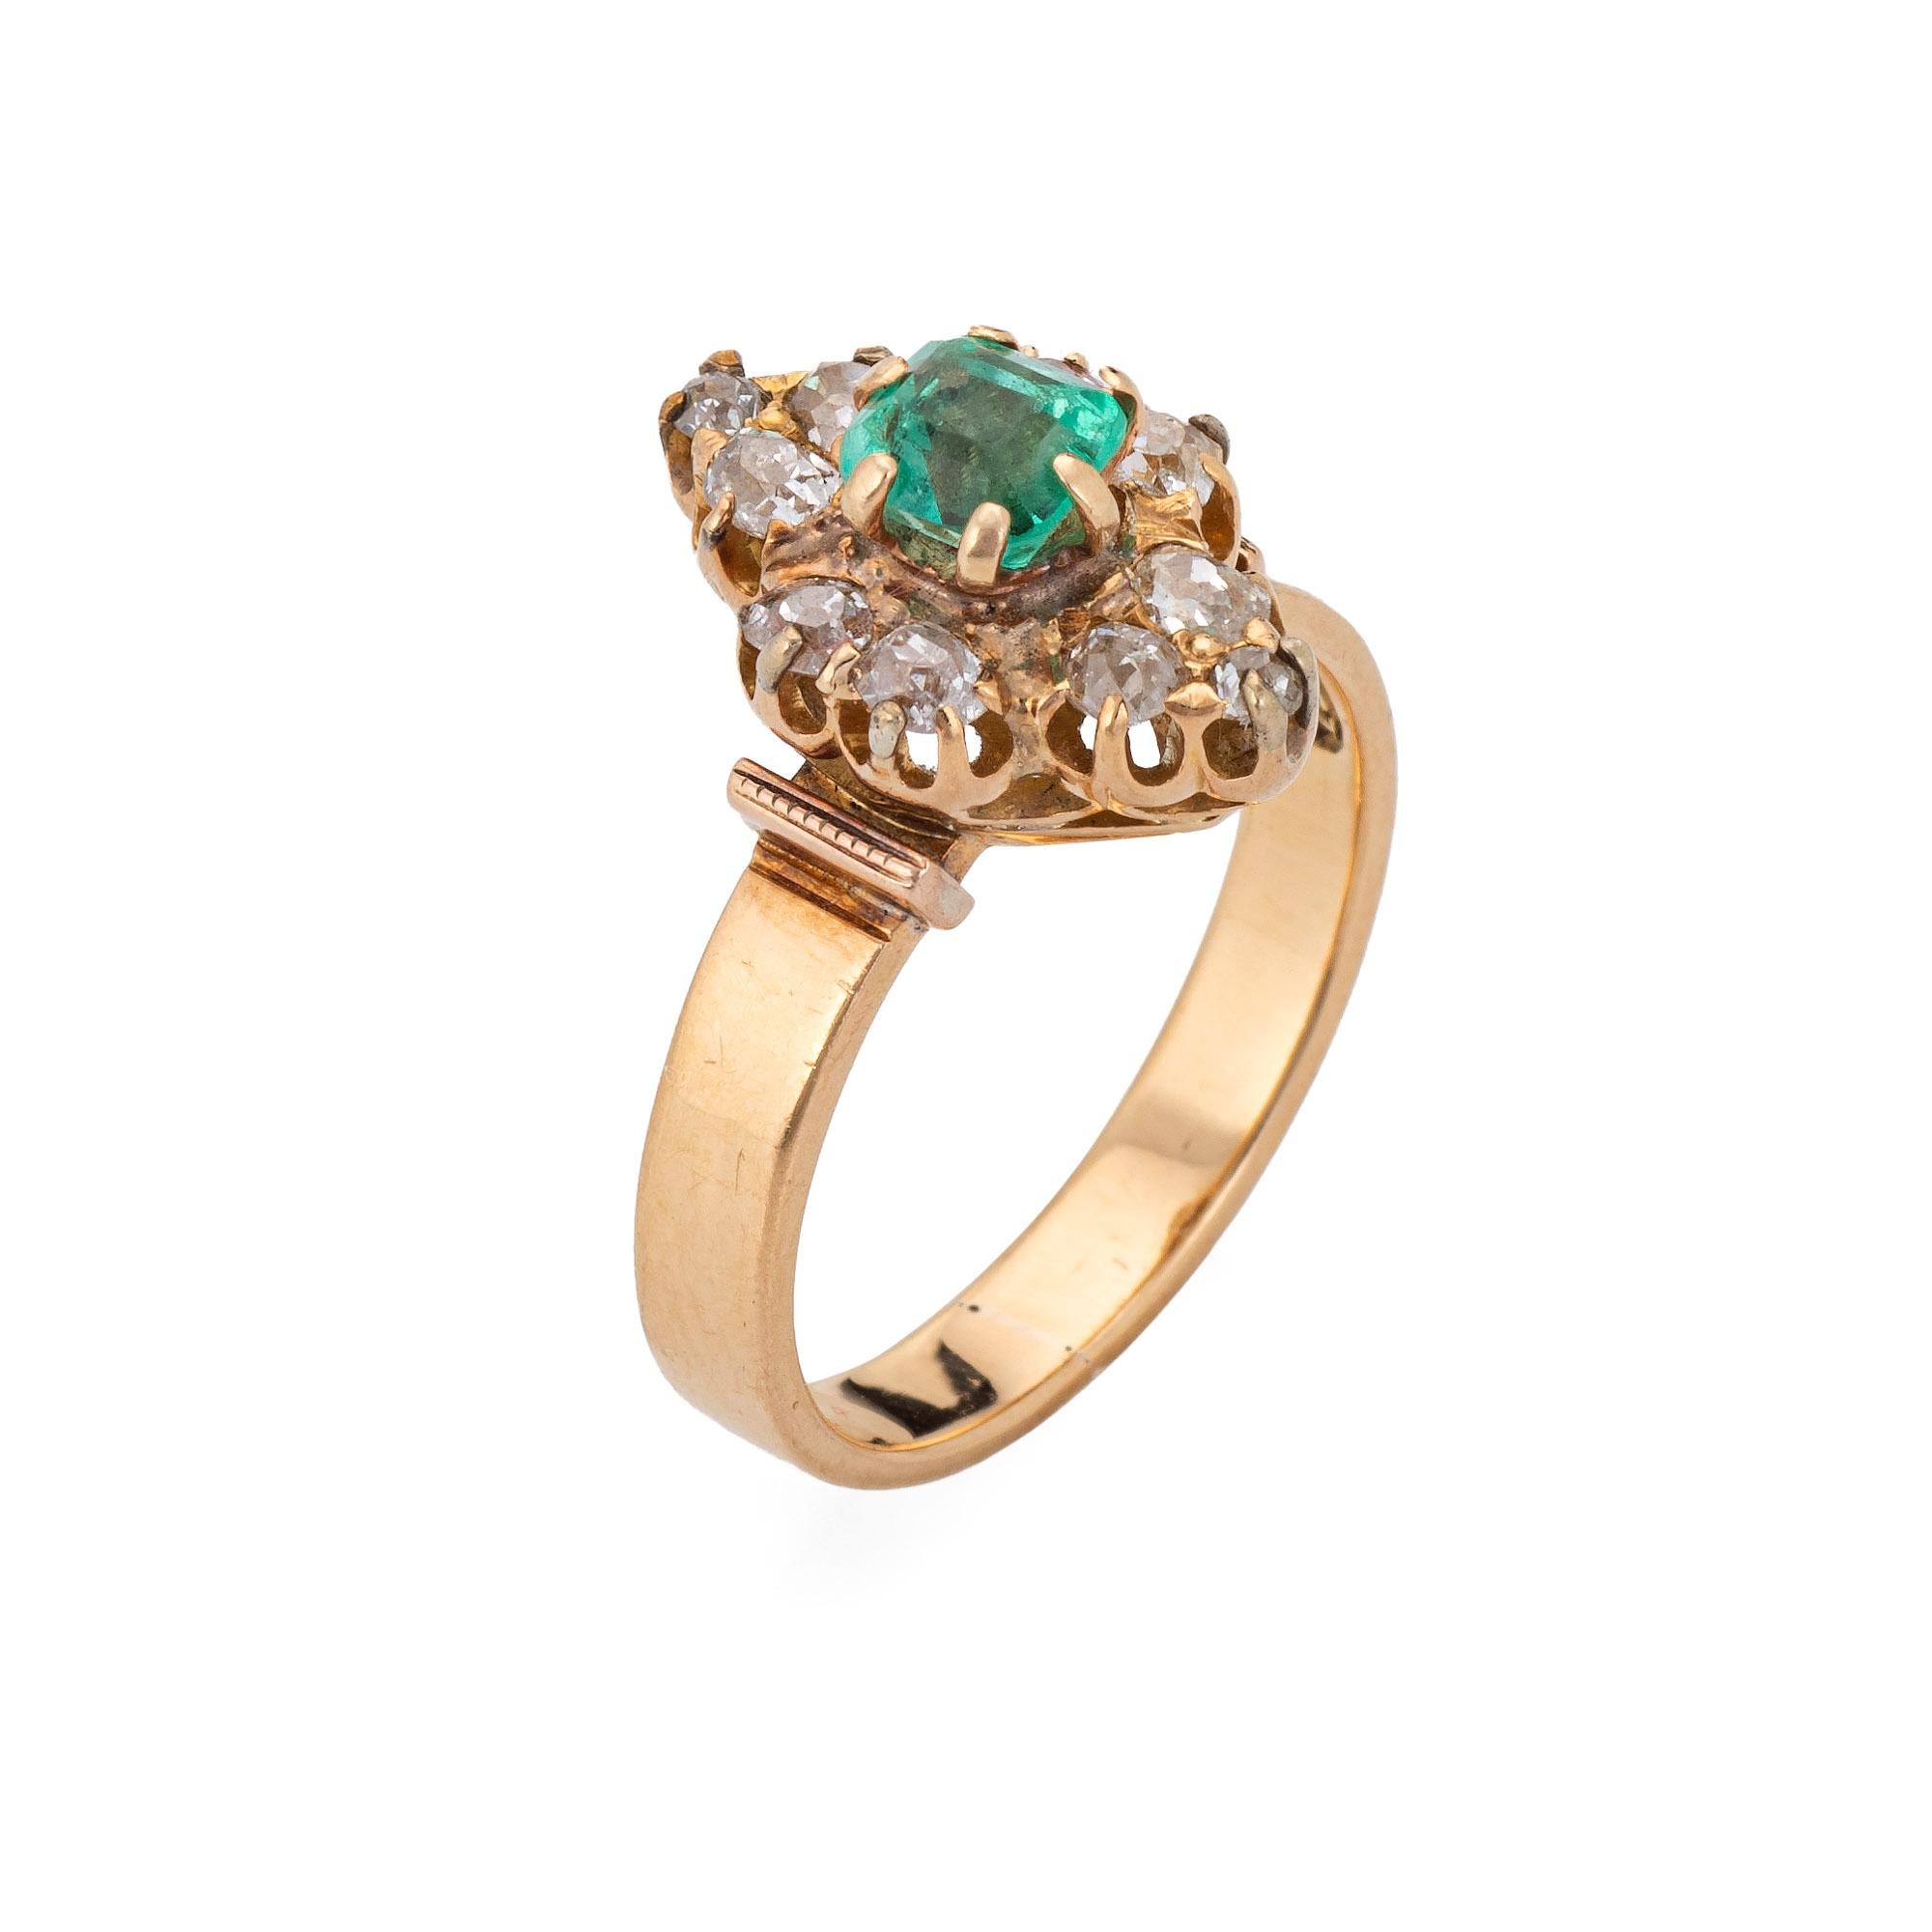 Elegant antique Victorian ring (circa 1880s to 1900s), crafted in 18 karat rose gold. 

Emerald measures 4.5mm x 4.5mm (estimated at 0.50 carats). Note: chip to the emerald and light surface abrasions. Old cushion cut diamonds range in size from